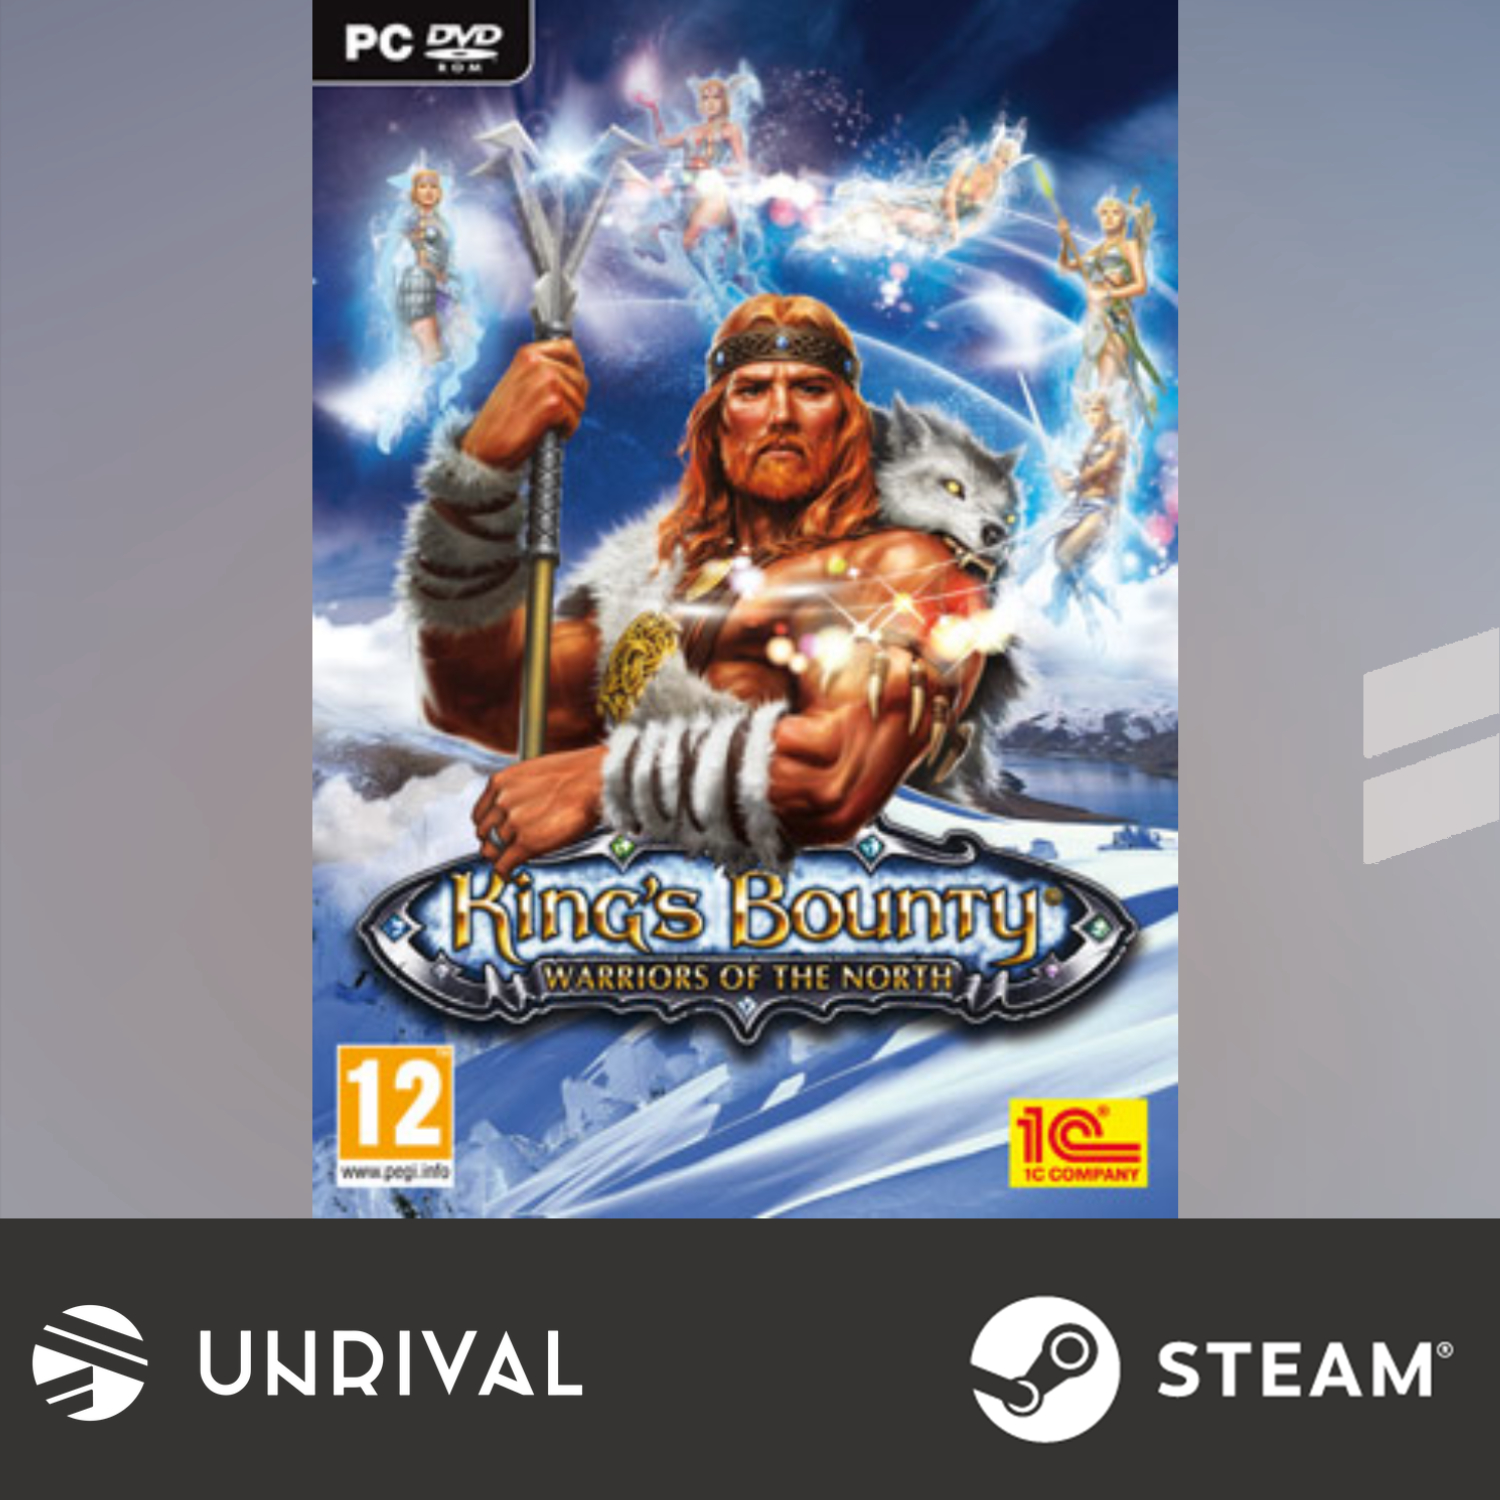 King's Bounty: Warriors of the North PC Digital Download Game (Single Player) - Unrival